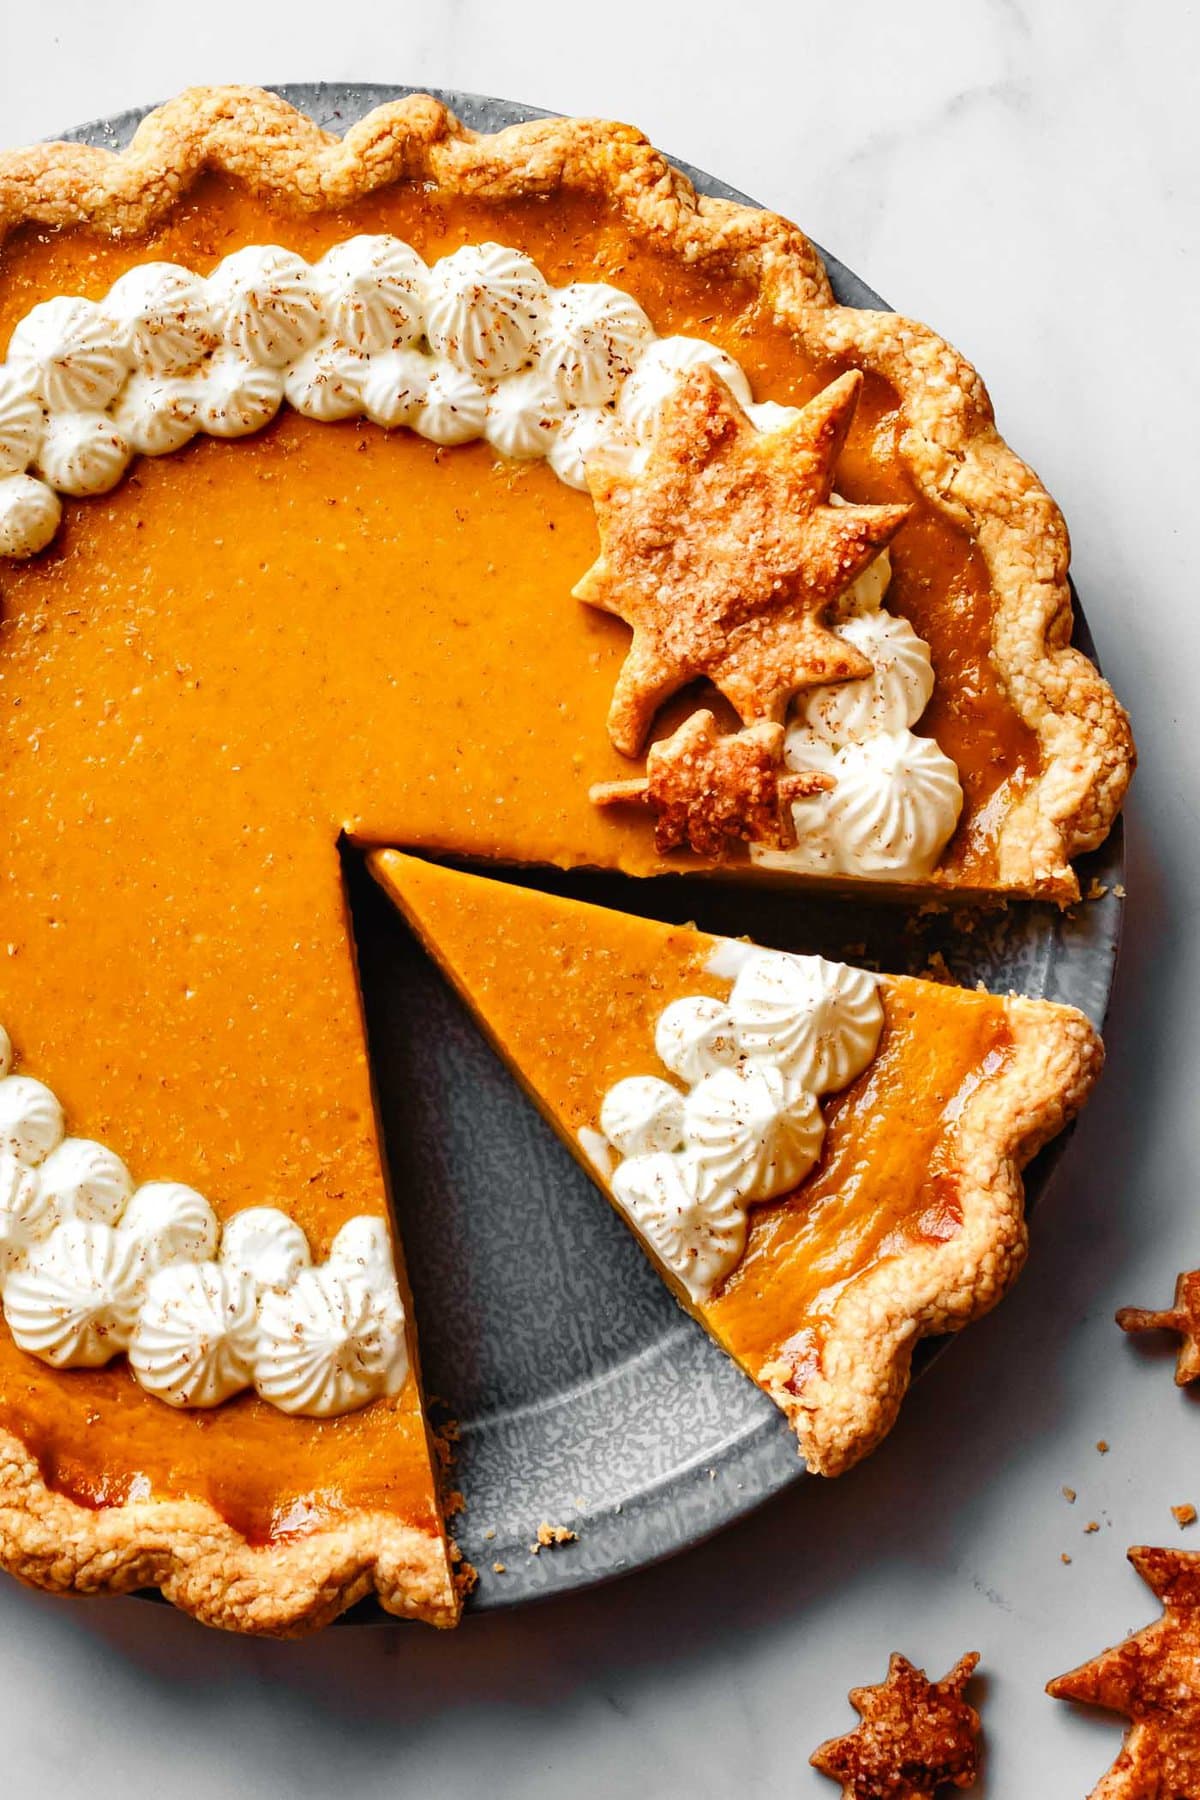 a vibrant orange gluten-free pumpkin pie has been piped with whipped topping and decorated with leaf cutouts, shown close-up